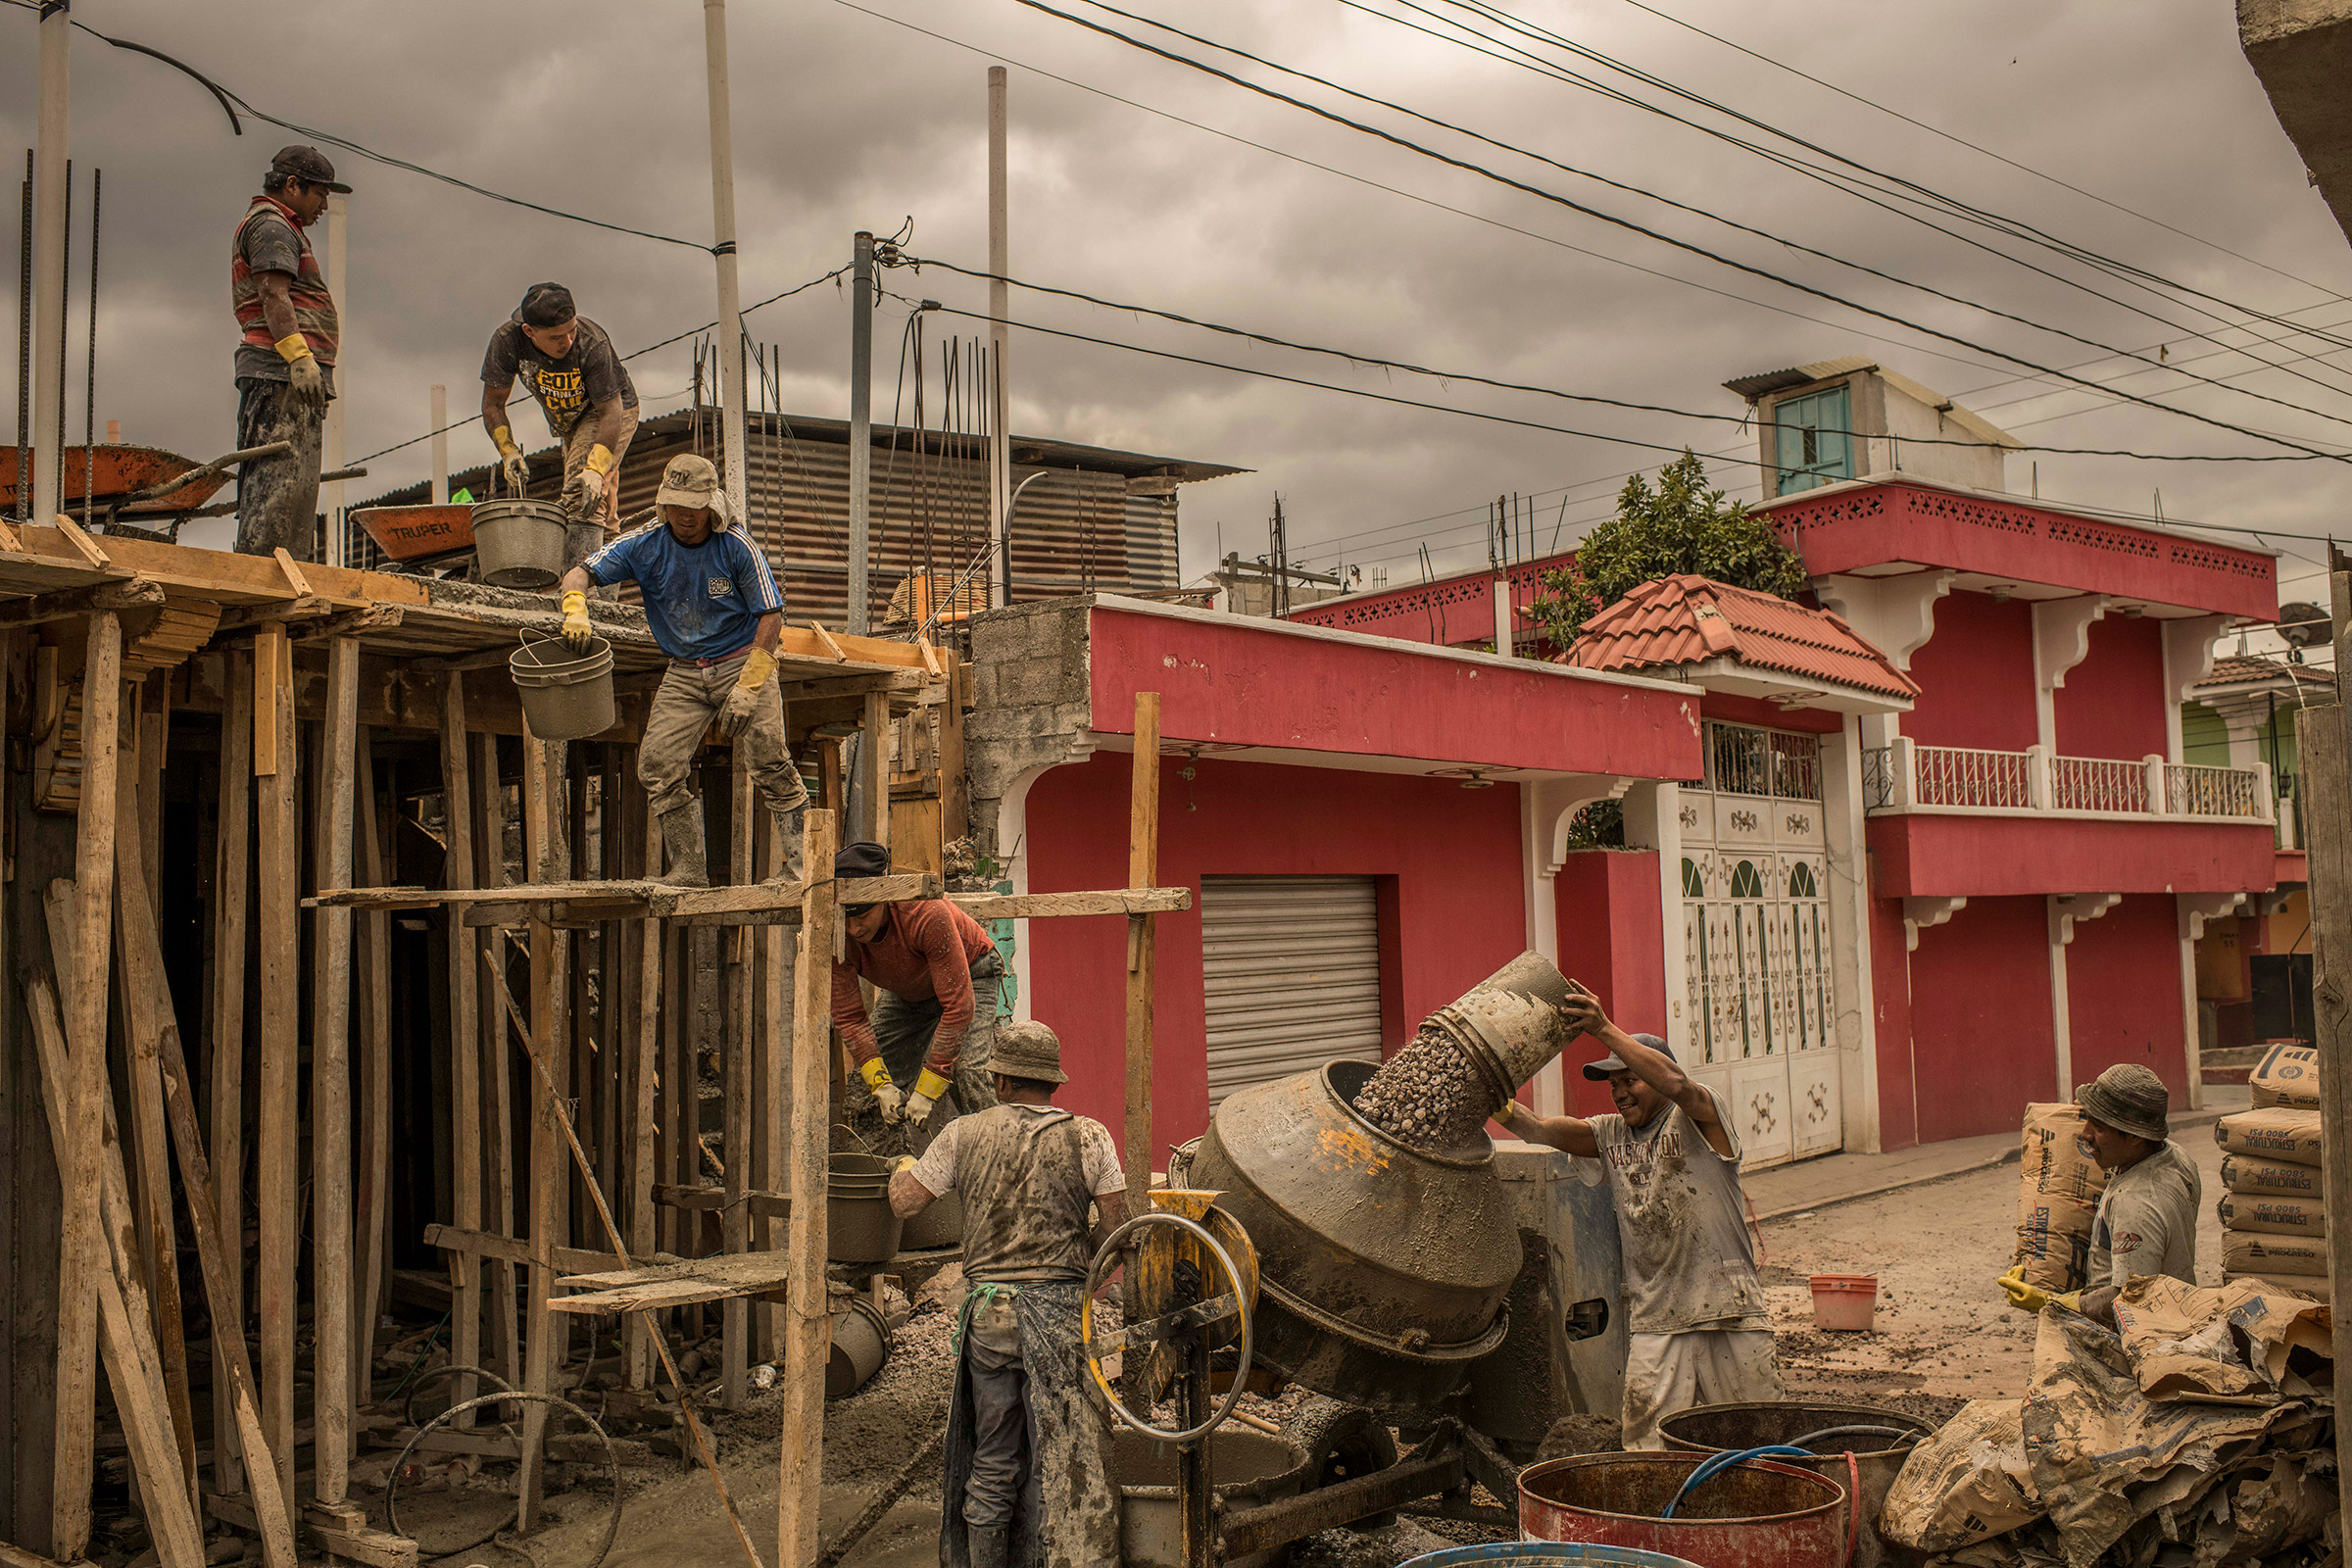 Workers build a house in Cajolá, Quetzaltenango, Guatemala, paid for by remittances. (Daniele Volpe for TIME)